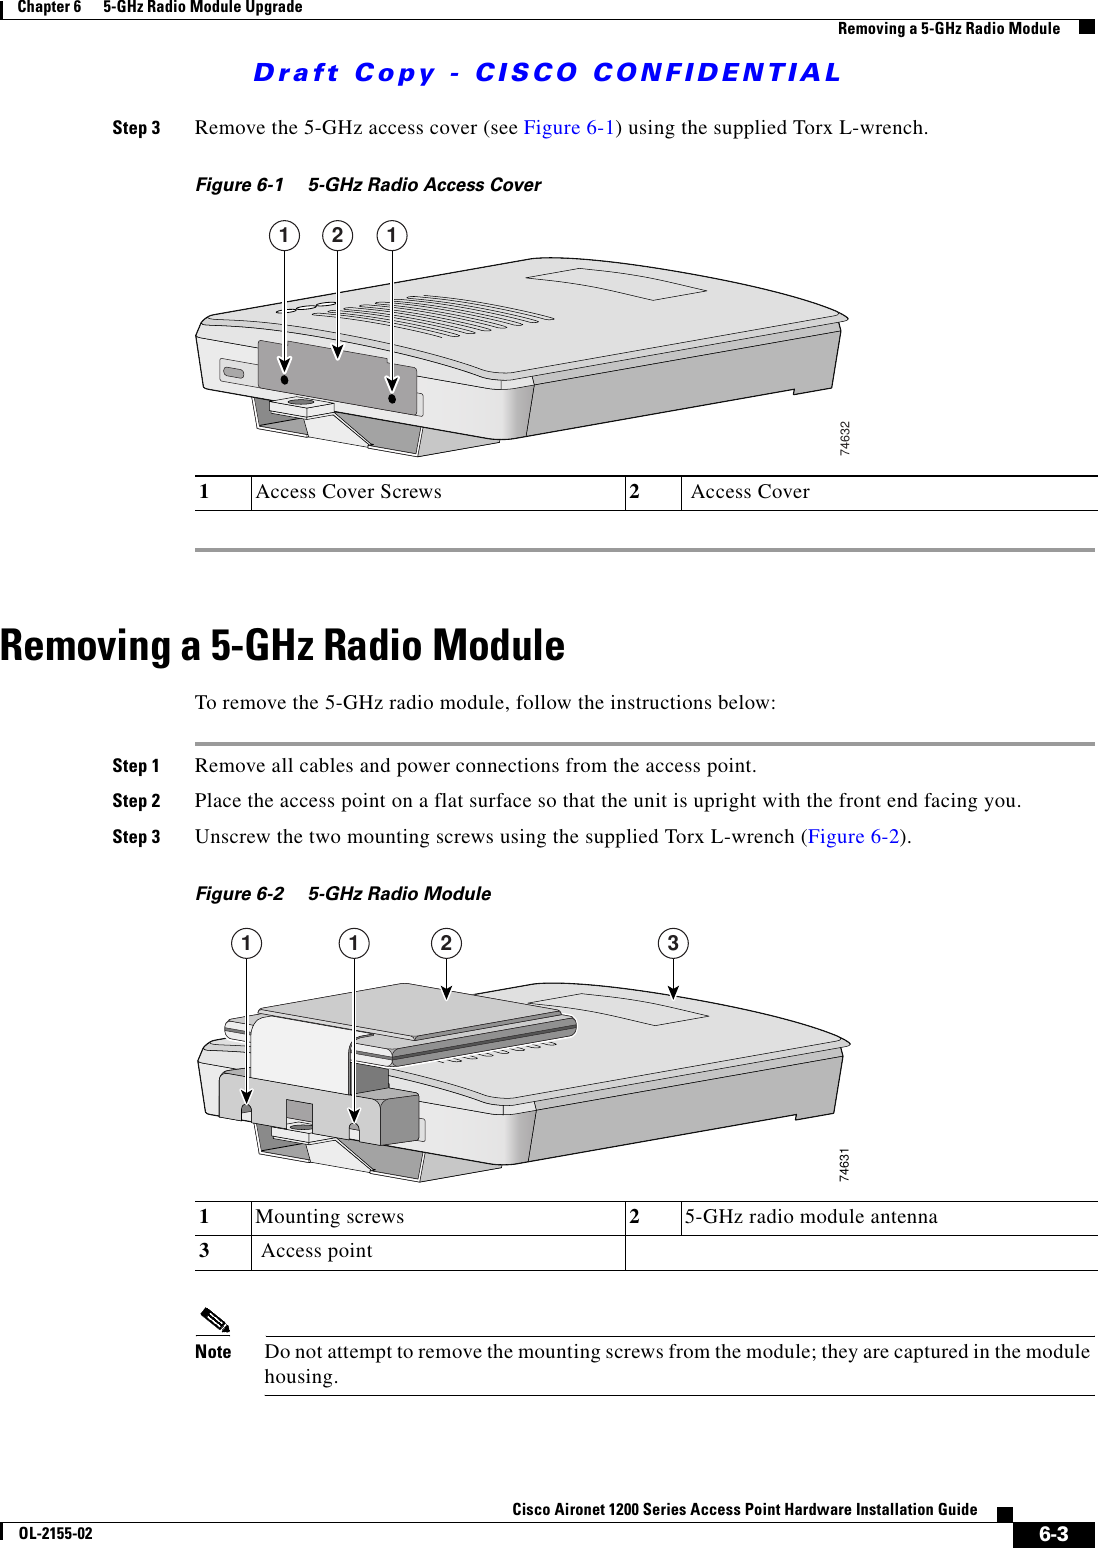 Draft Copy - CISCO CONFIDENTIAL 6-3Cisco Aironet 1200 Series Access Point Hardware Installation GuideOL-2155-02Chapter 6      5-GHz Radio Module UpgradeRemoving a 5-GHz Radio ModuleStep 3 Remove the 5-GHz access cover (see Figure 6-1) using the supplied Torx L-wrench.Figure 6-1 5-GHz Radio Access CoverRemoving a 5-GHz Radio ModuleTo remove the 5-GHz radio module, follow the instructions below:Step 1 Remove all cables and power connections from the access point.Step 2 Place the access point on a flat surface so that the unit is upright with the front end facing you.Step 3 Unscrew the two mounting screws using the supplied Torx L-wrench (Figure 6-2).Figure 6-2 5-GHz Radio Module Note Do not attempt to remove the mounting screws from the module; they are captured in the module housing.1Access Cover Screws 2 Access Cover1 12746321Mounting screws  25-GHz radio module antenna3 Access point746311 1 2 3